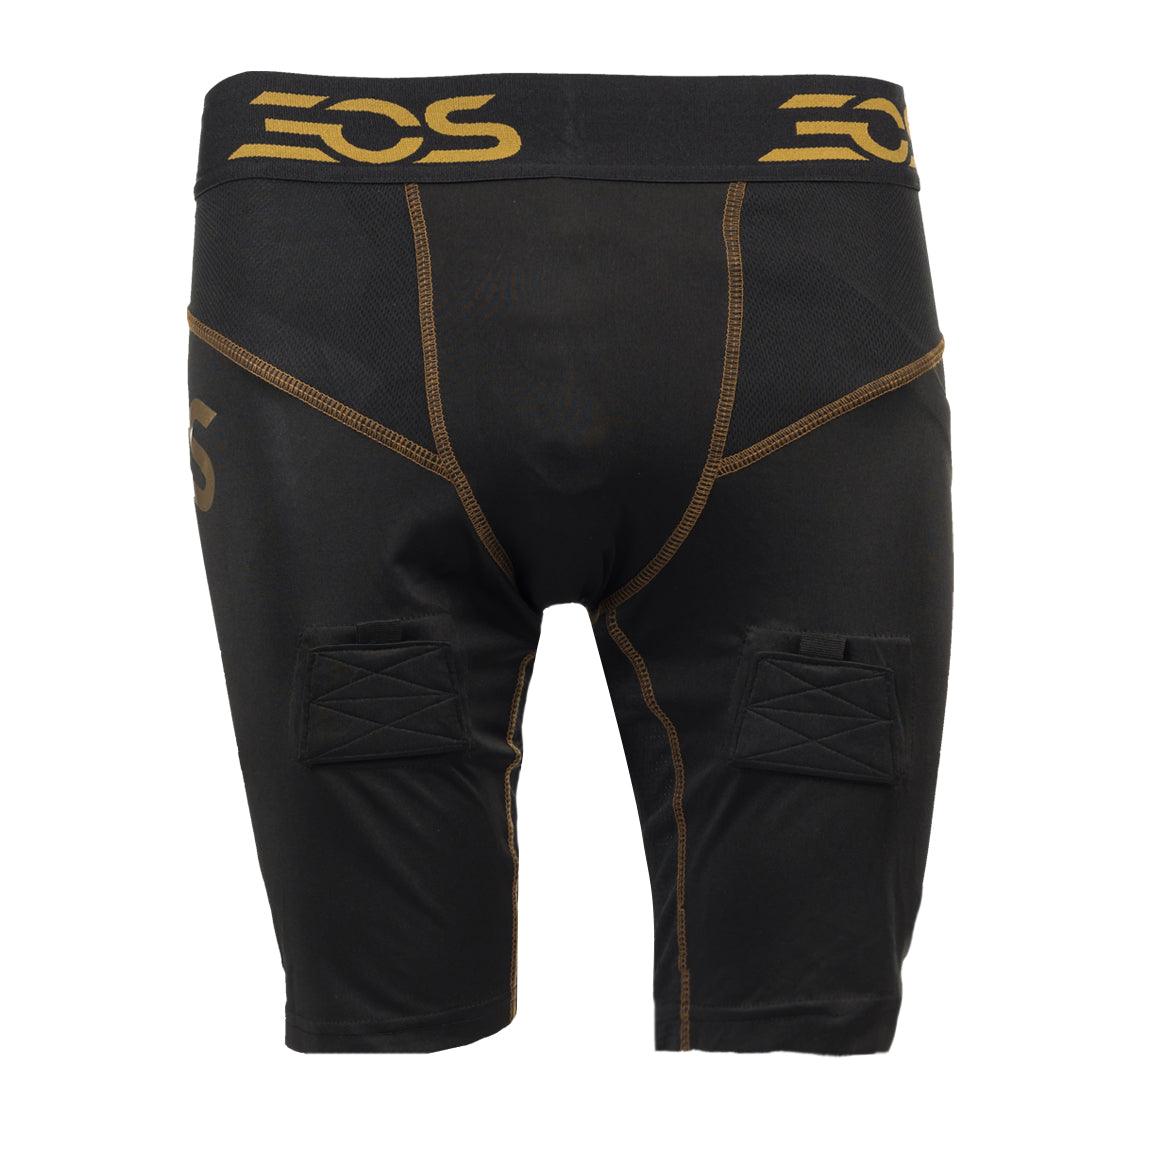 EOS 50 Boy's Compression Baselayer Shorts - Junior - Sports Excellence